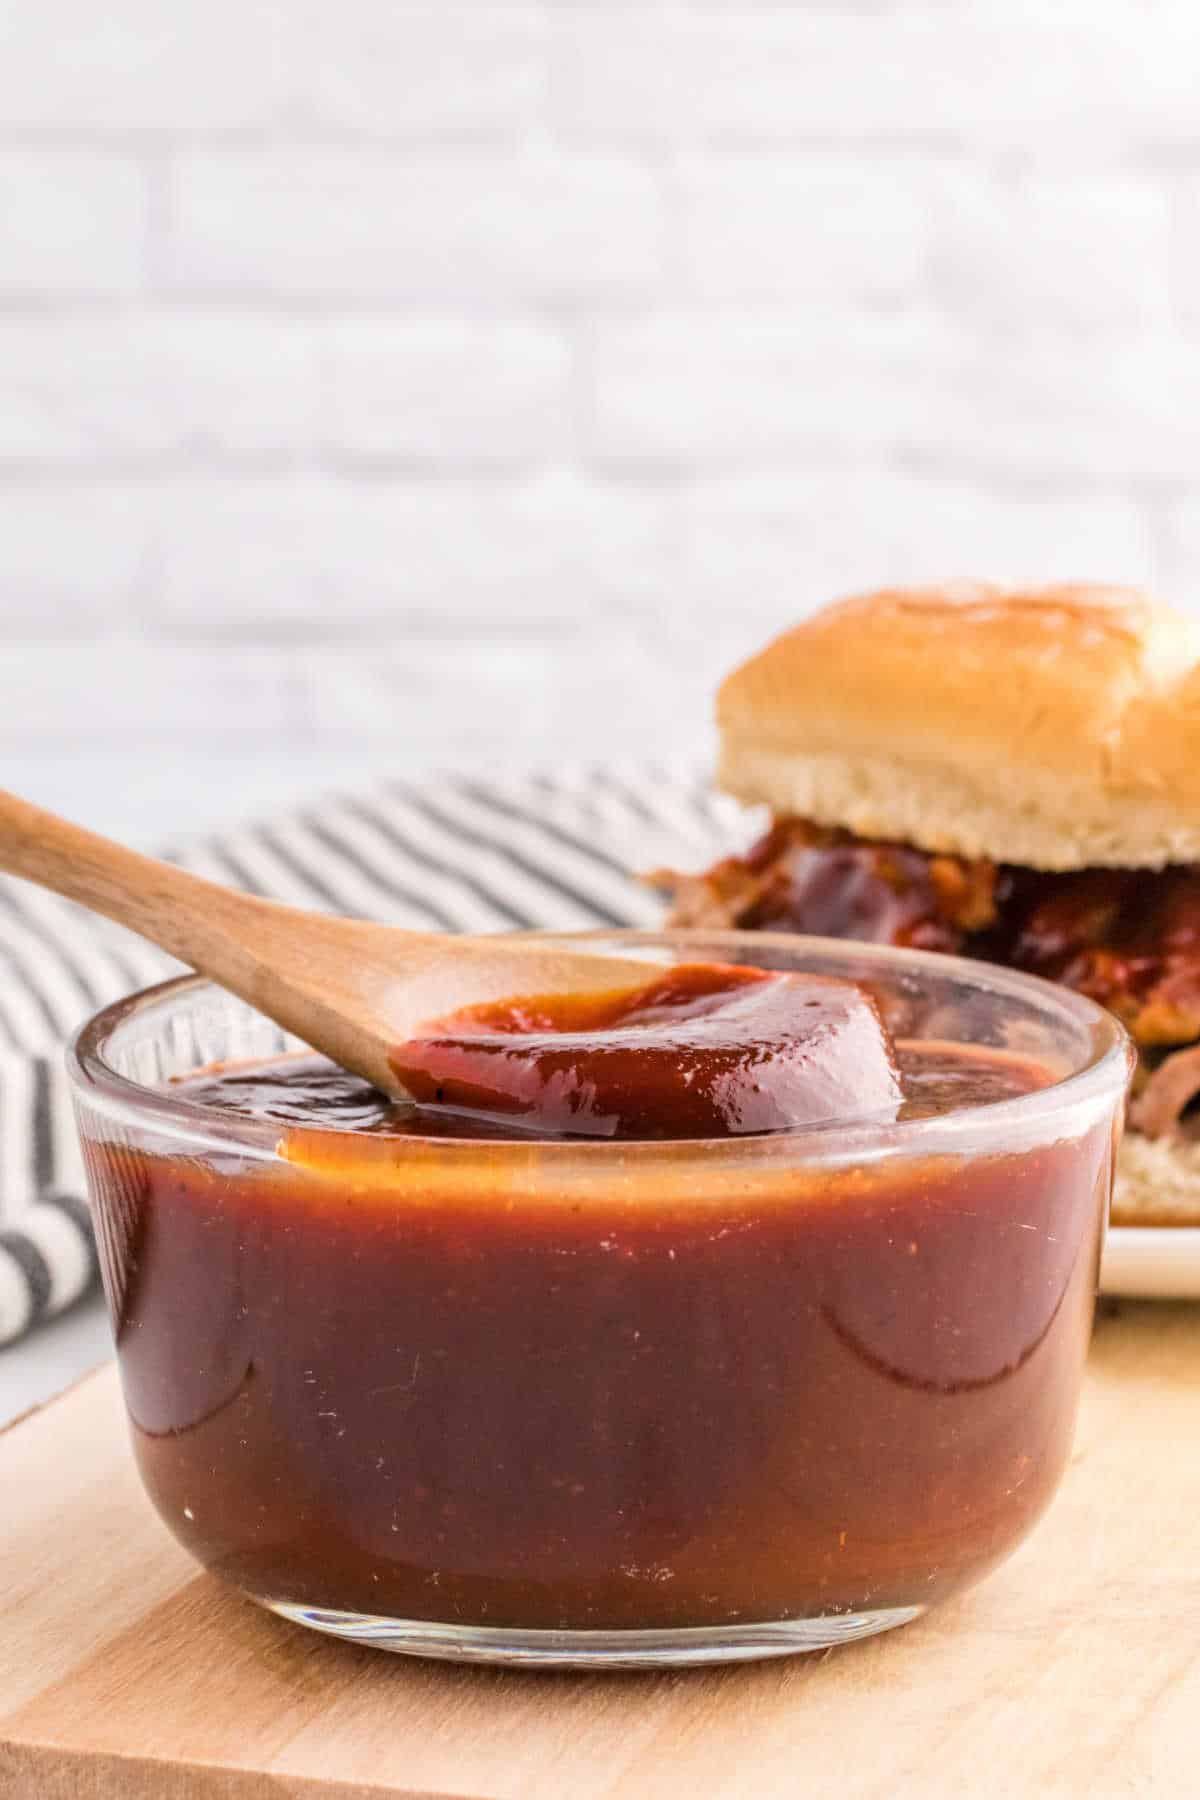 A bowl of homemade bbq sauce with a wooden spoon.